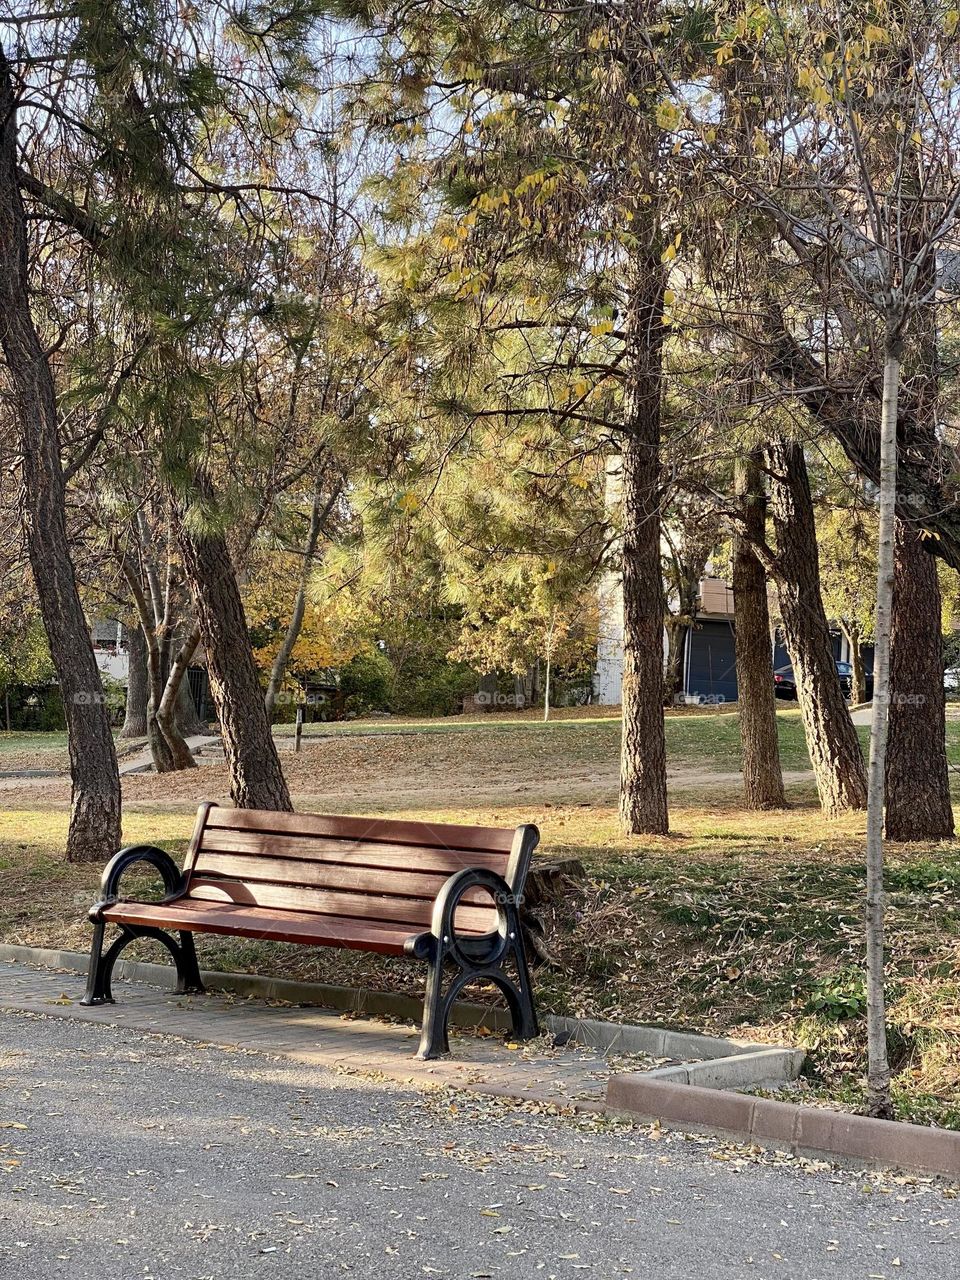 Bench in the park 